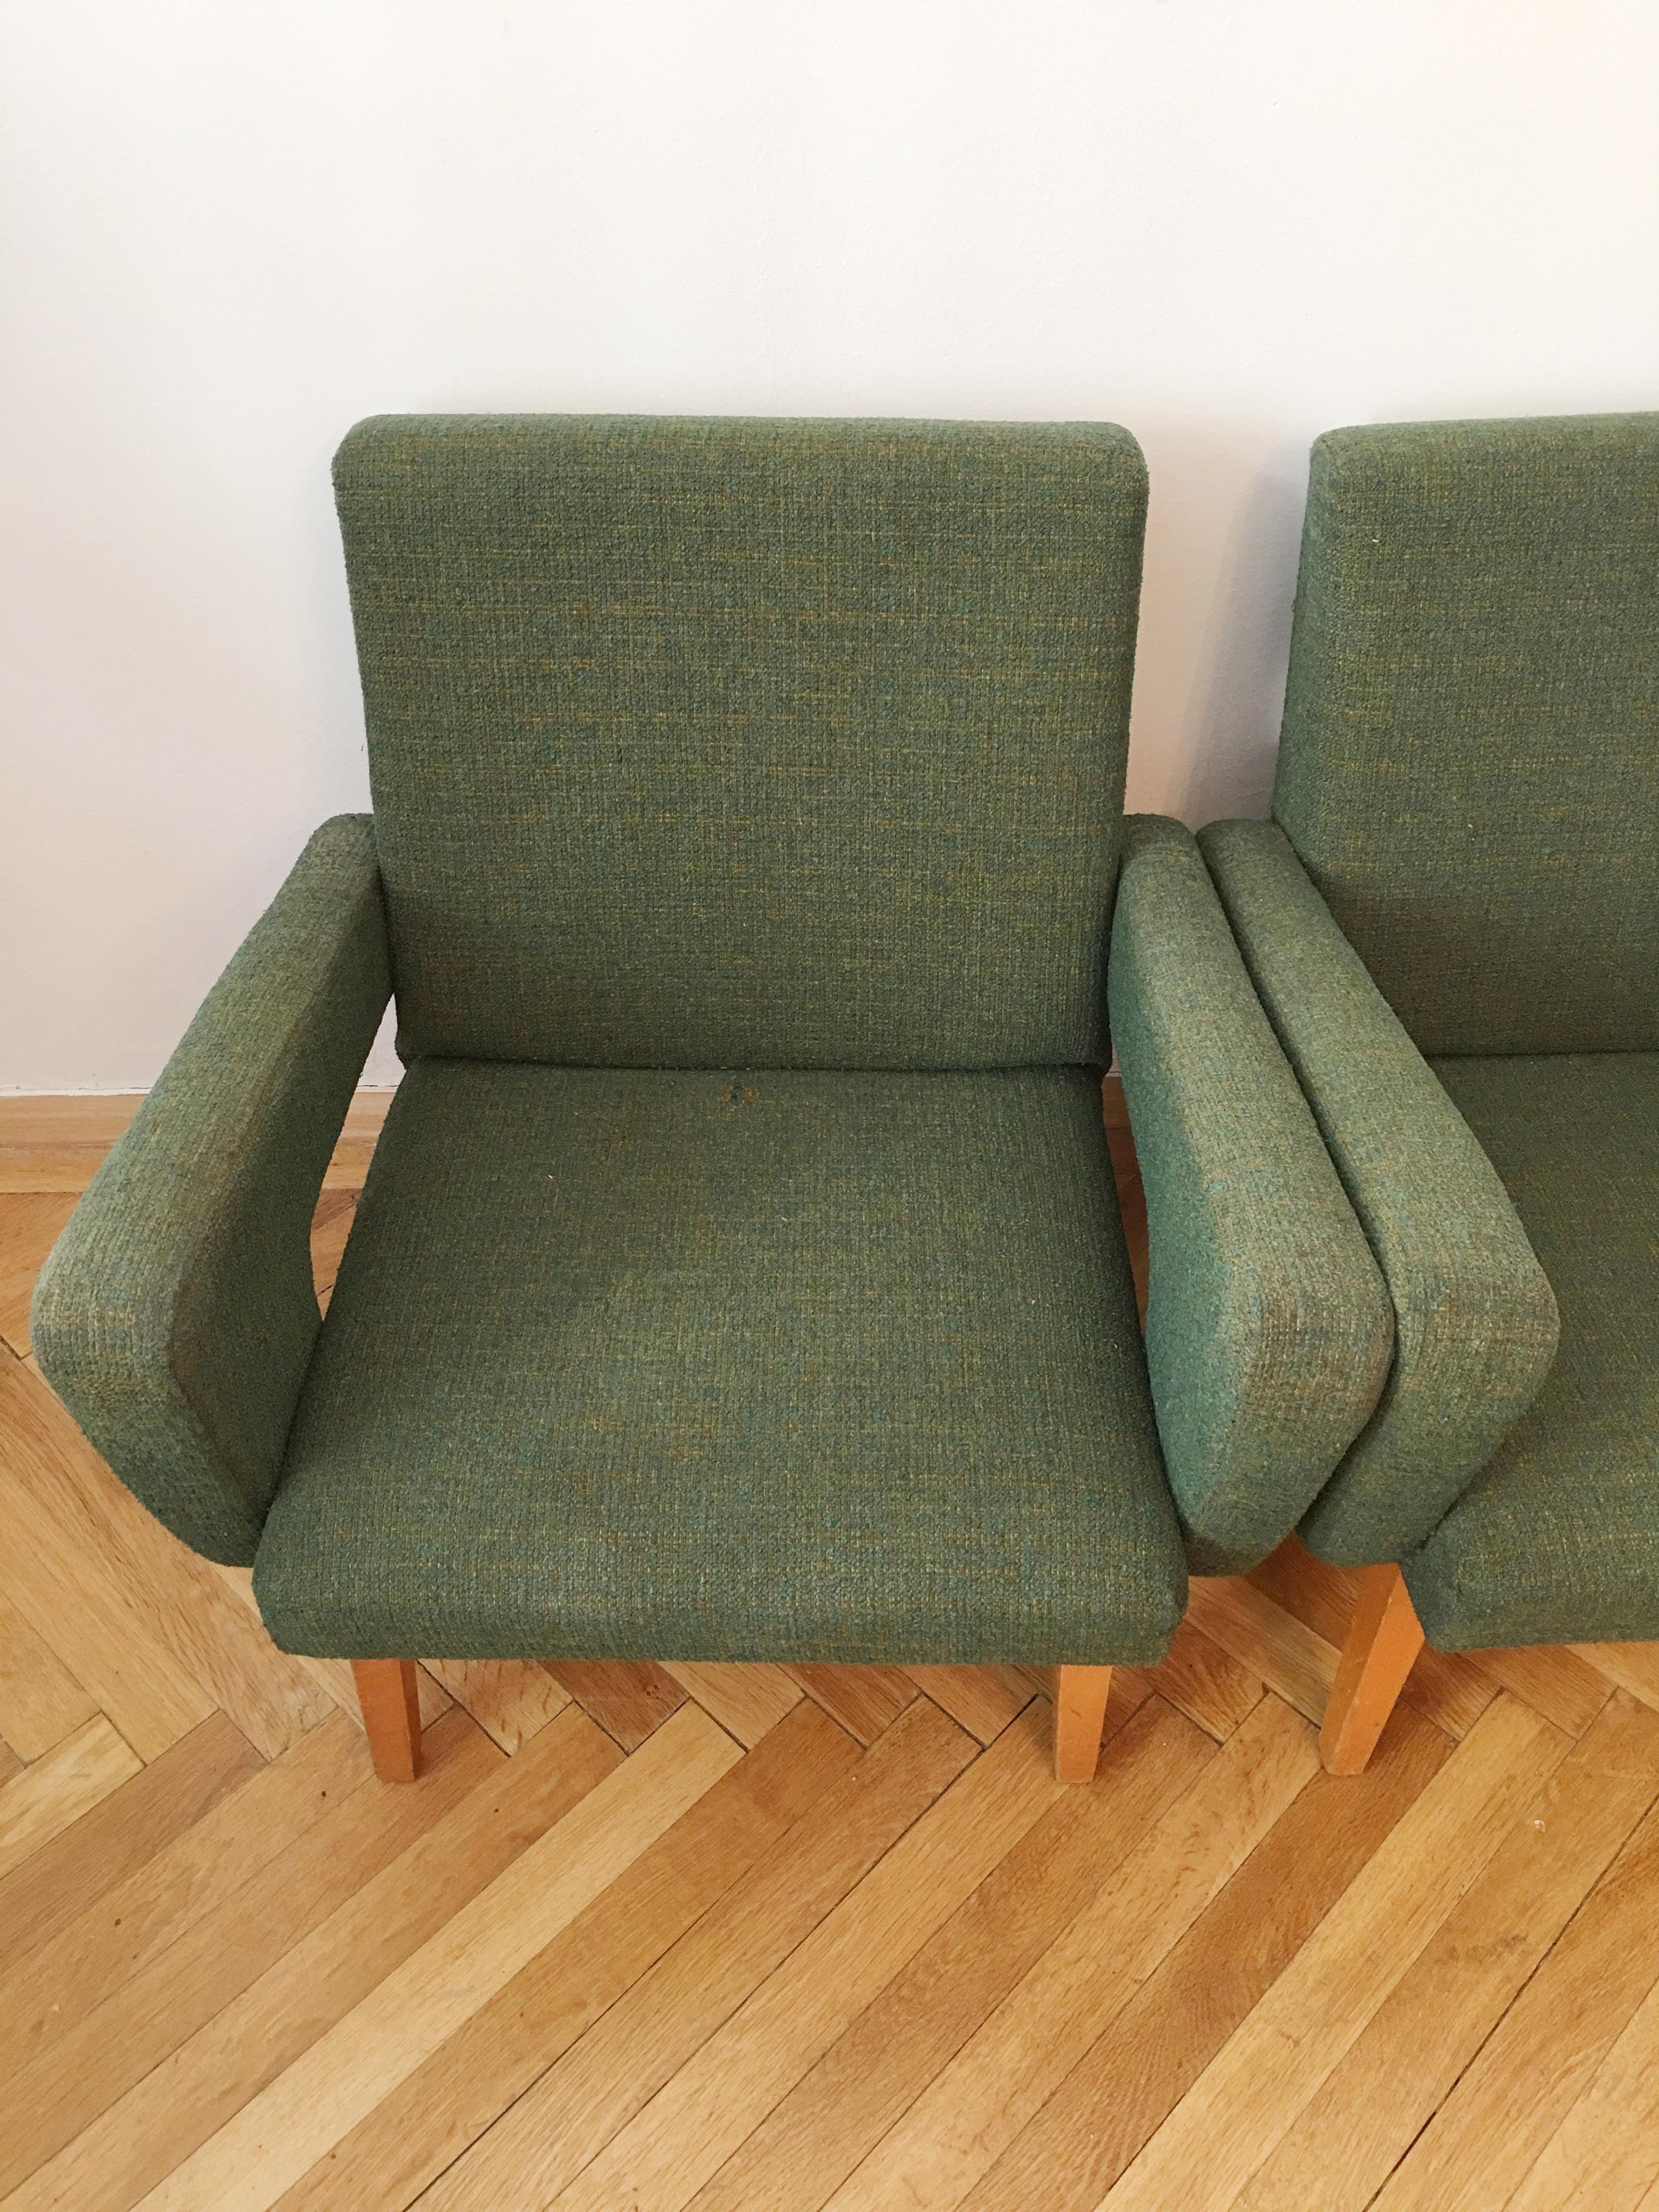 Czech Green Vintage Rocket Armchairs by Jitona, 1960s, Pair For Sale